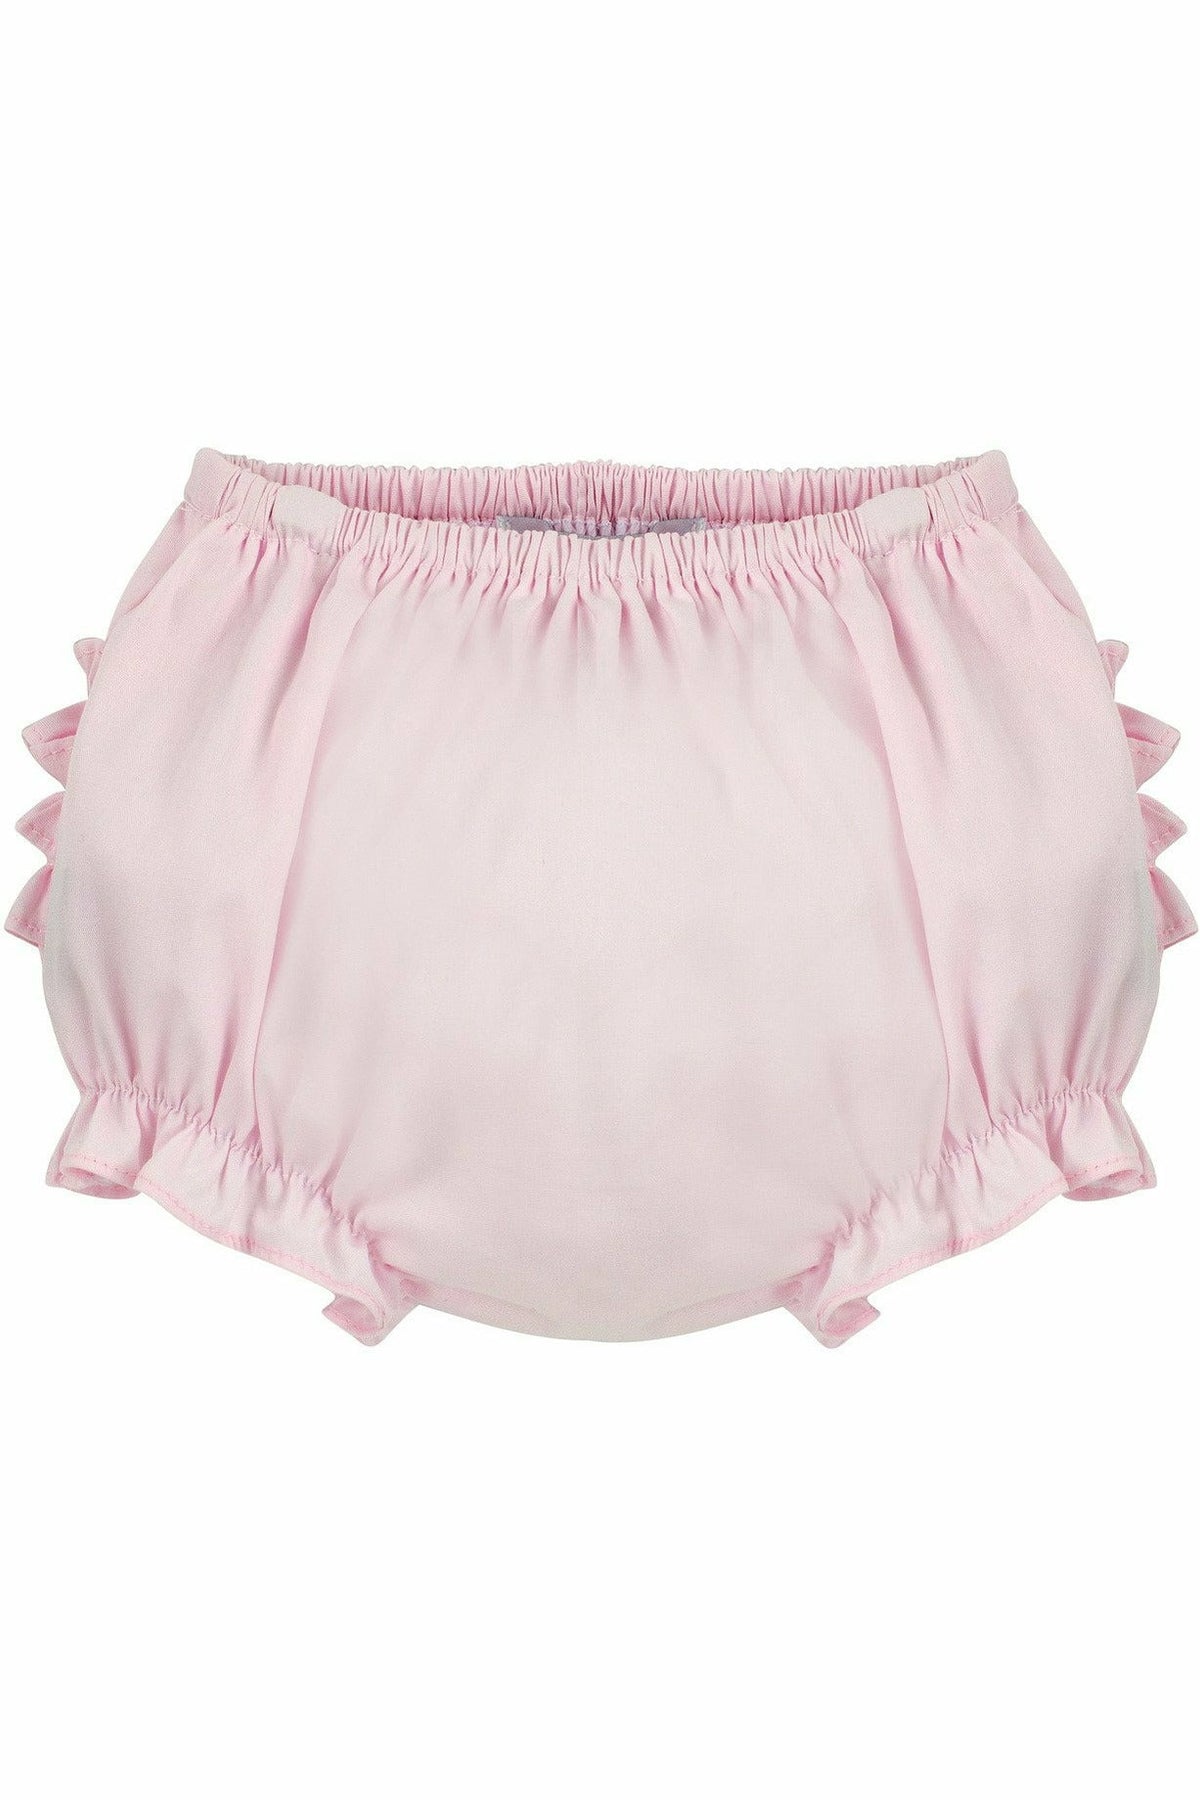 Baby Girls Ruffle Diaper Covers - Pink Bloomers – Carriage Boutique